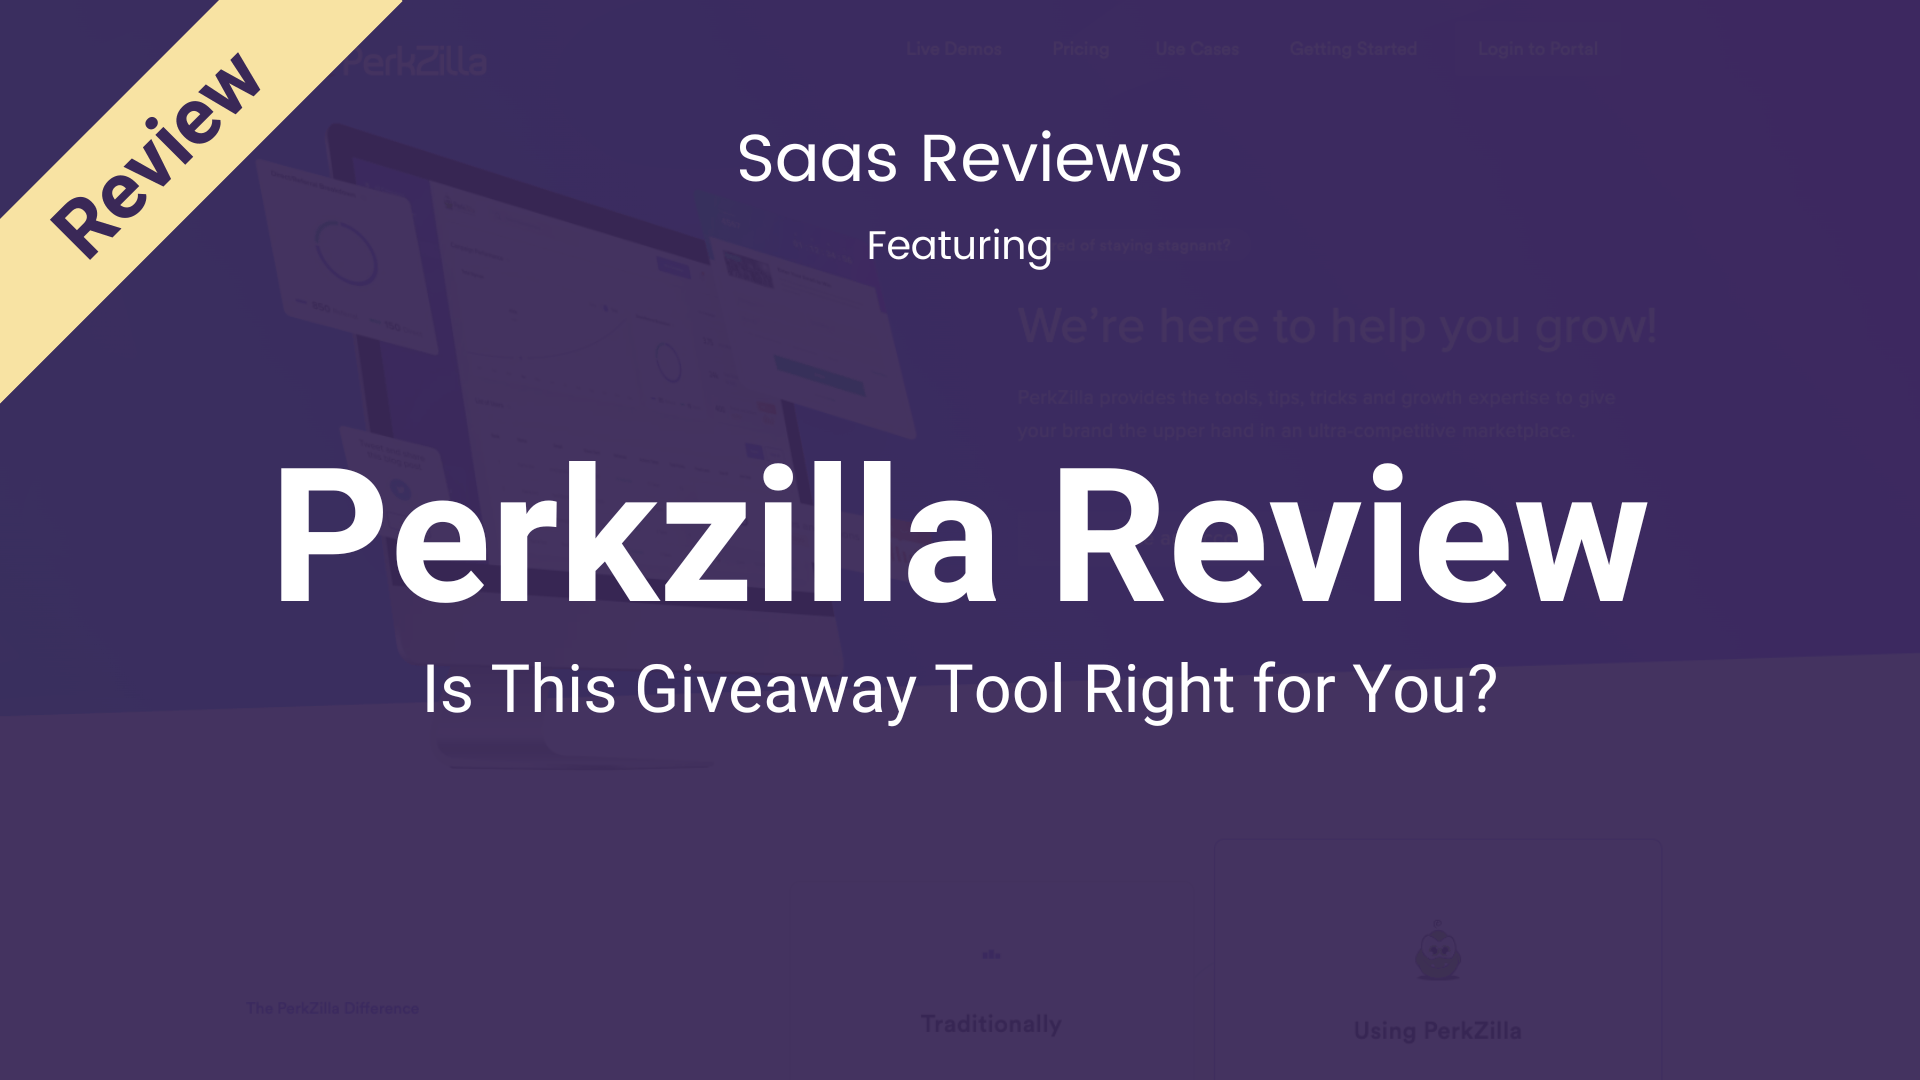 Perkzilla Review: Is This Giveaway Tool Right for You?